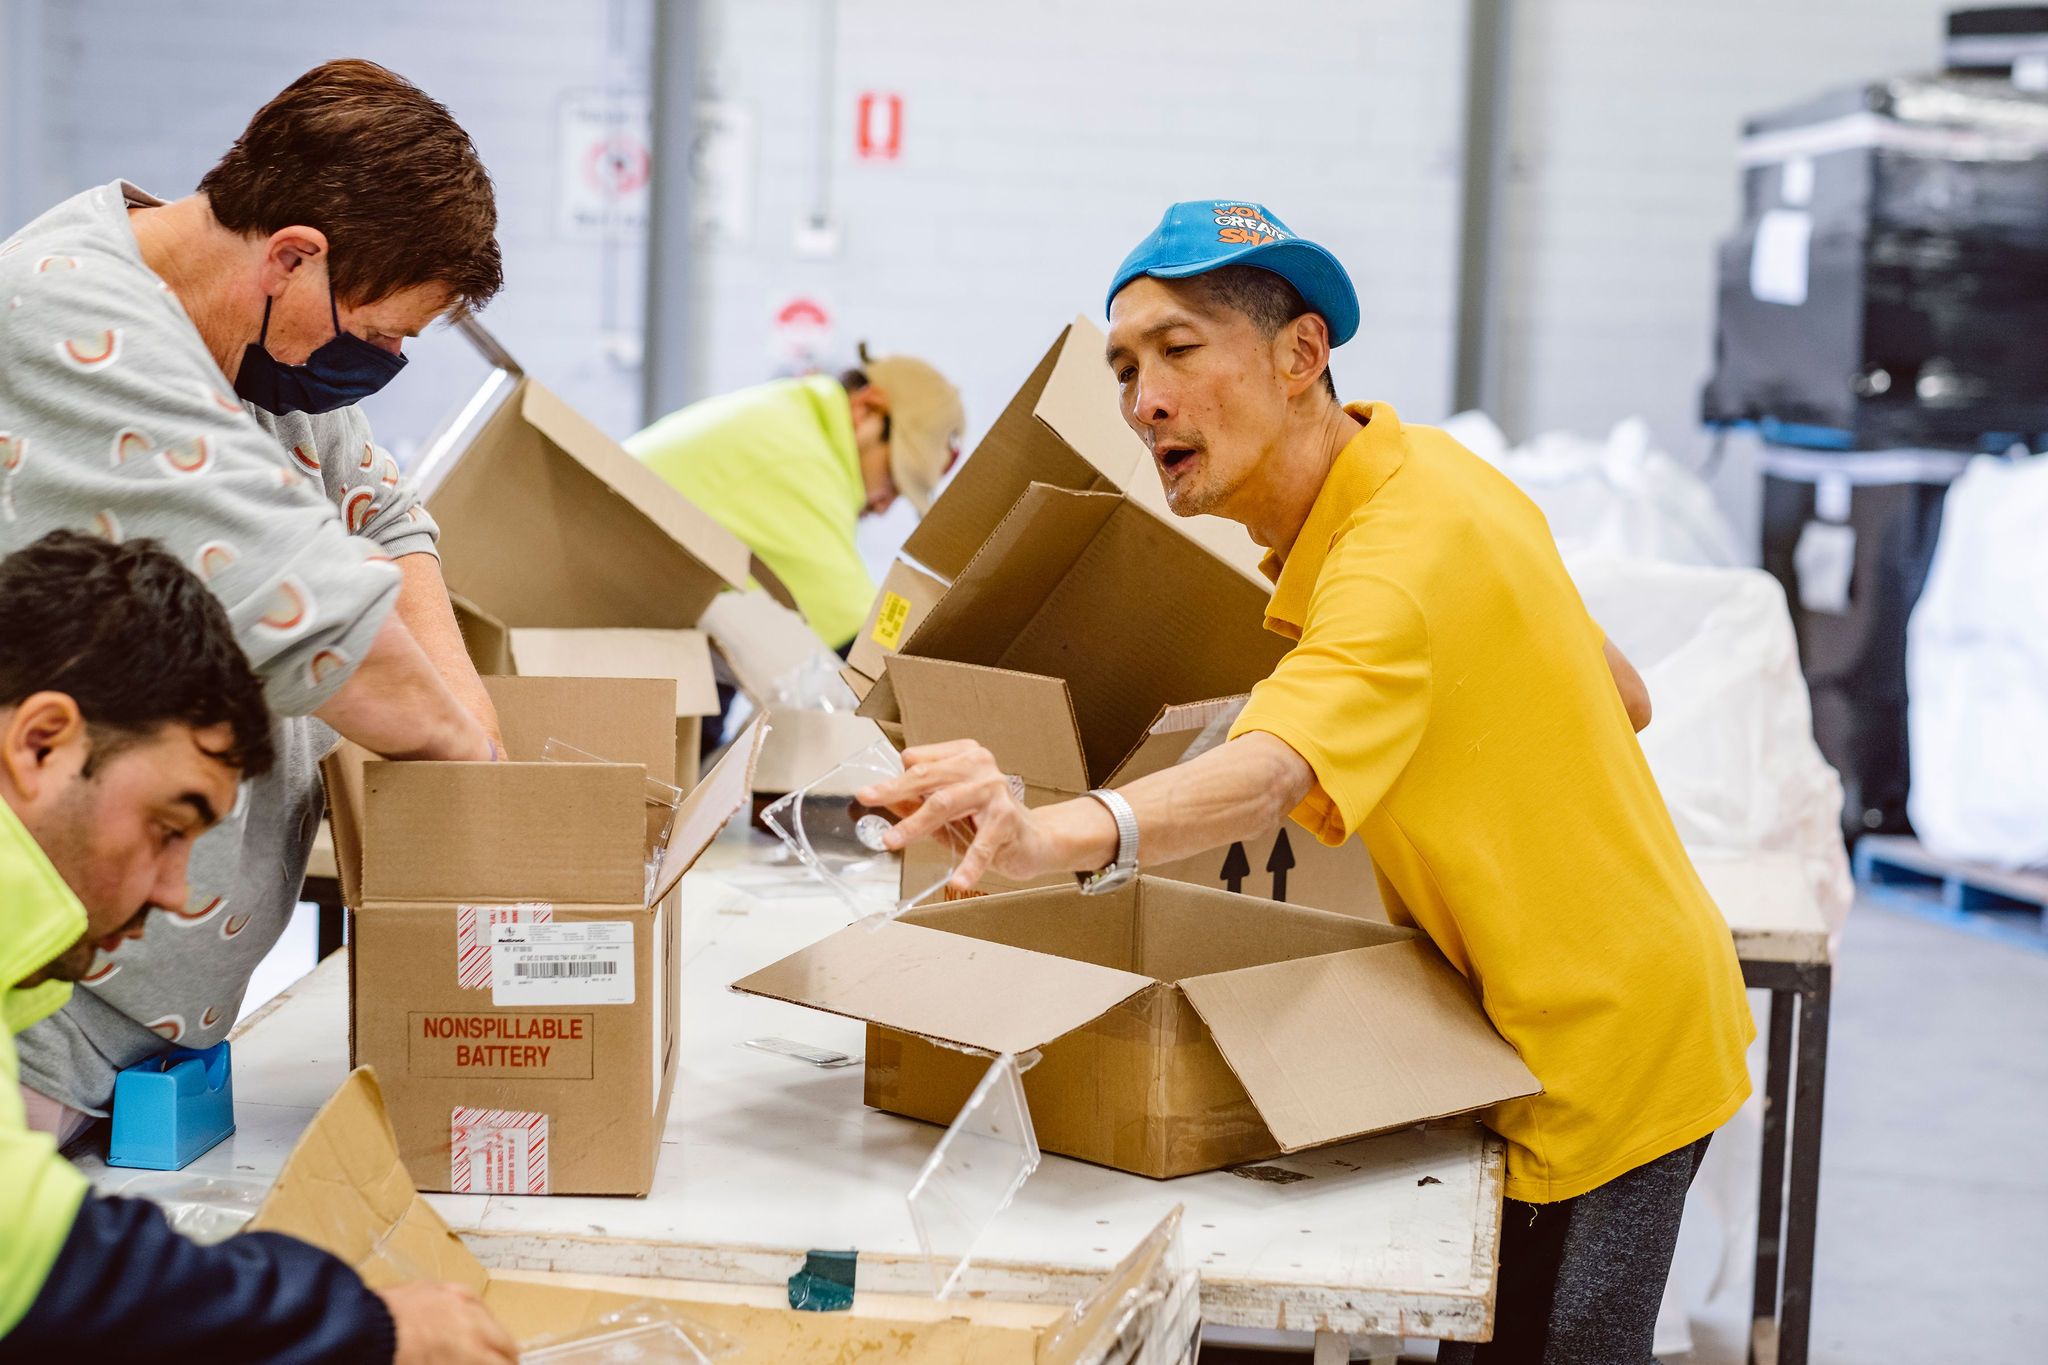 employees emptying boxes and placing products to be destroyed onto conveyer